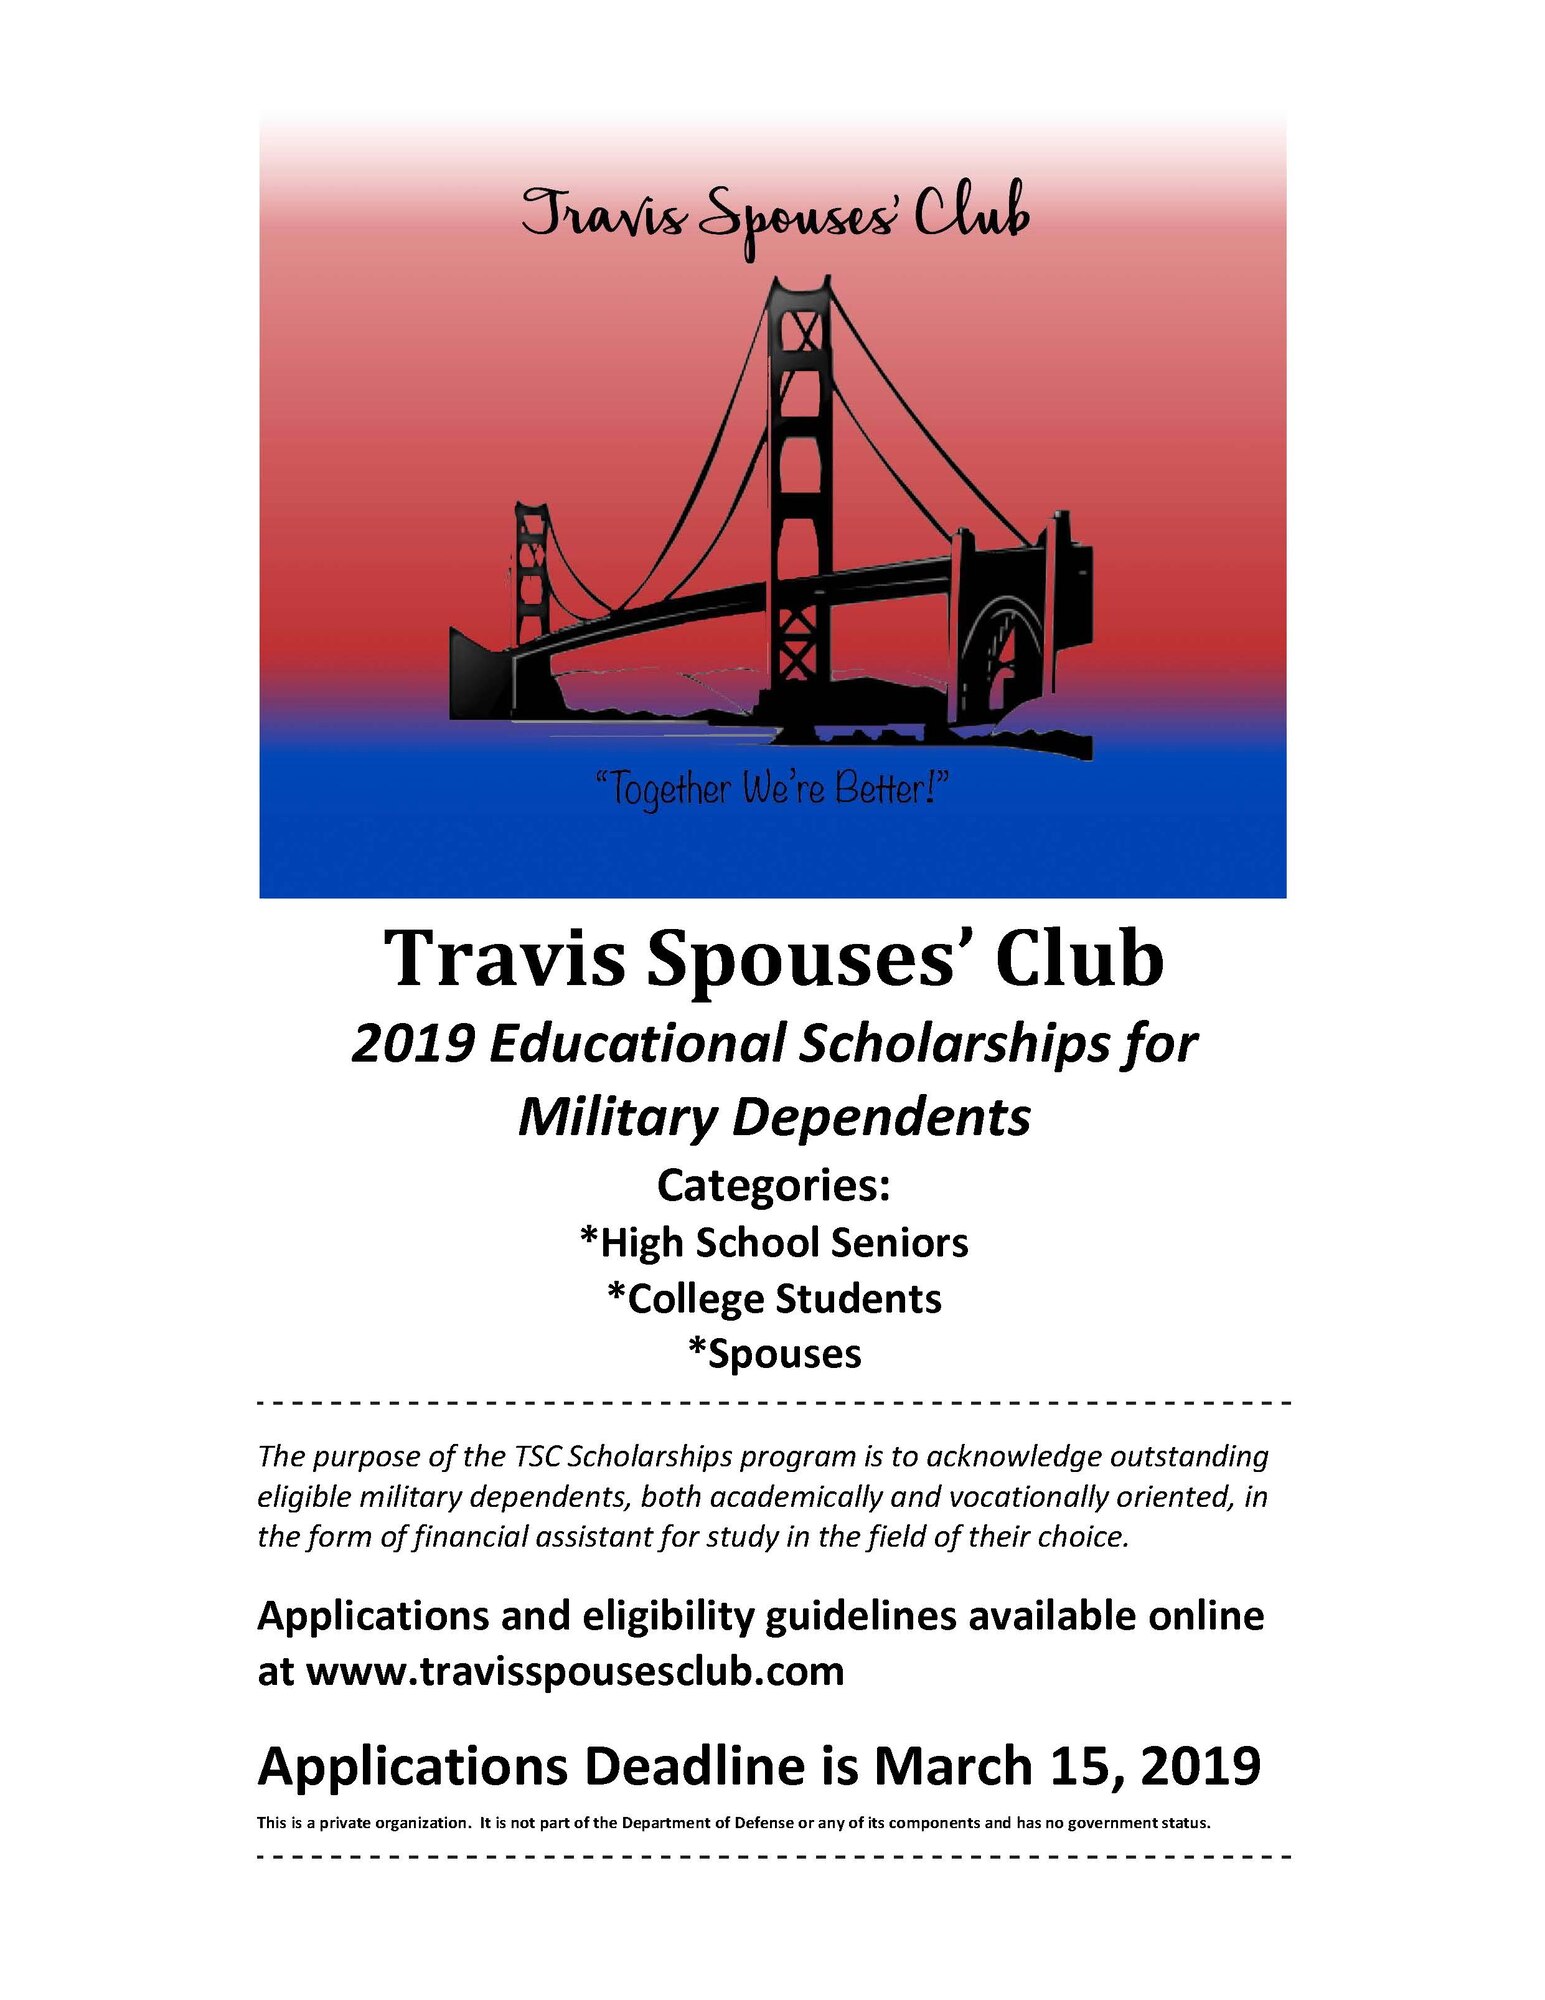 Travis Spouses Club offers scholarships